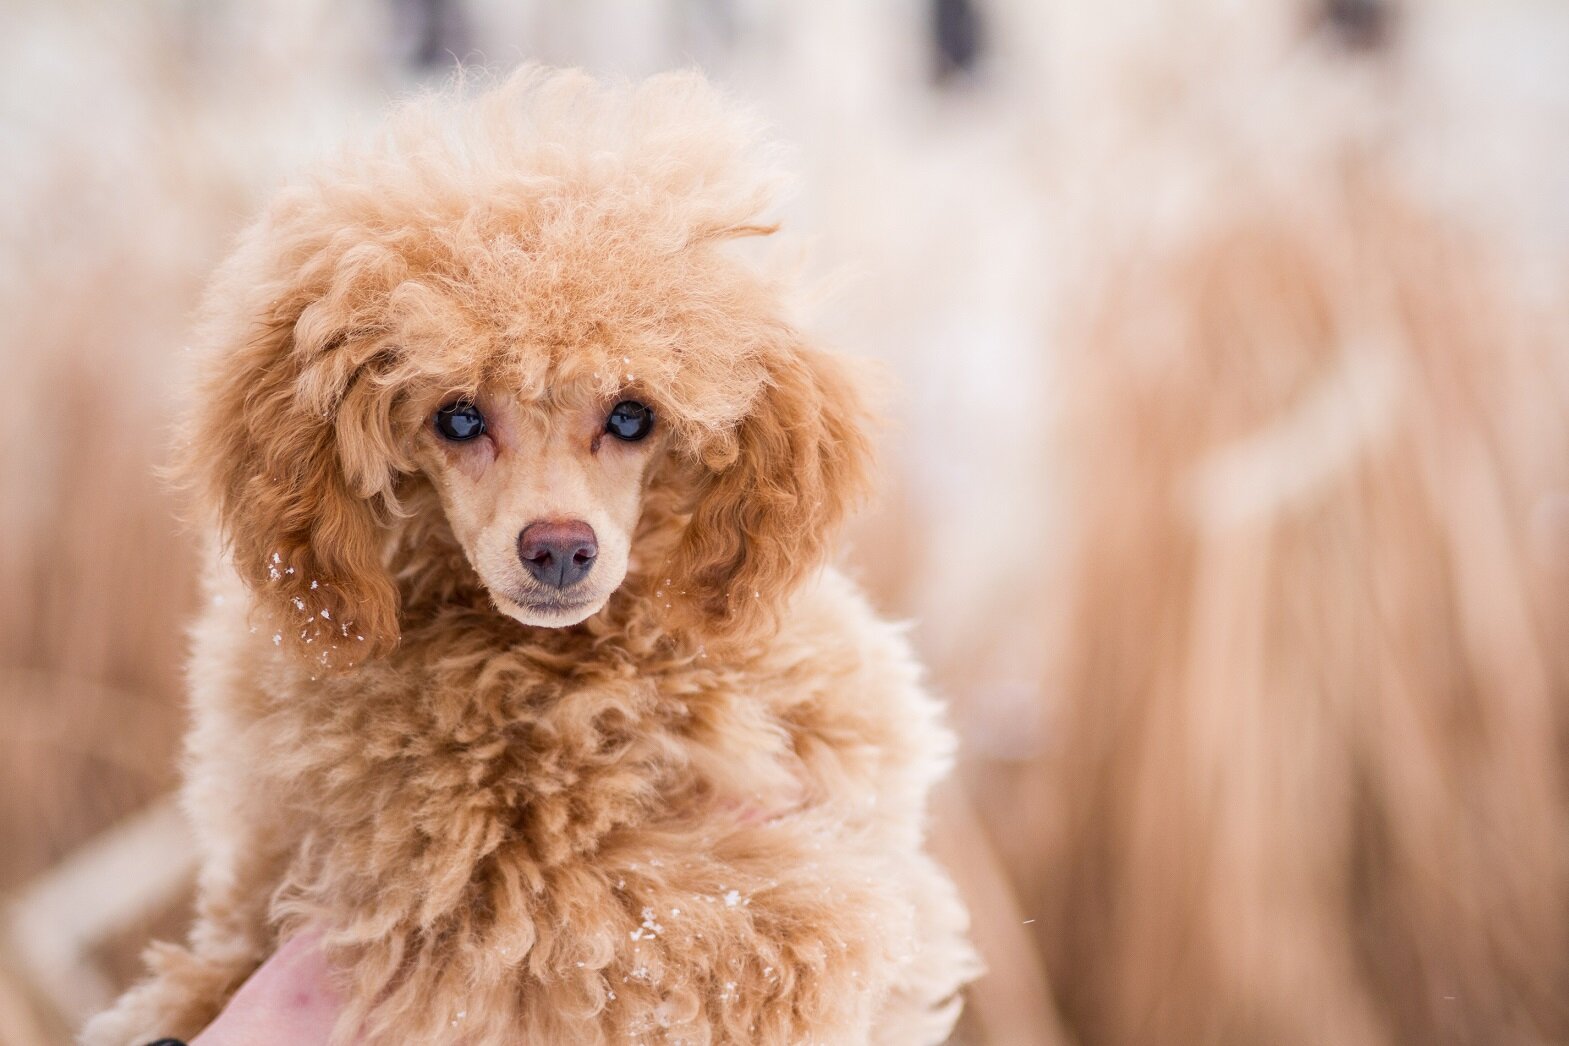 Donate To Our Rescue Poodle Angels